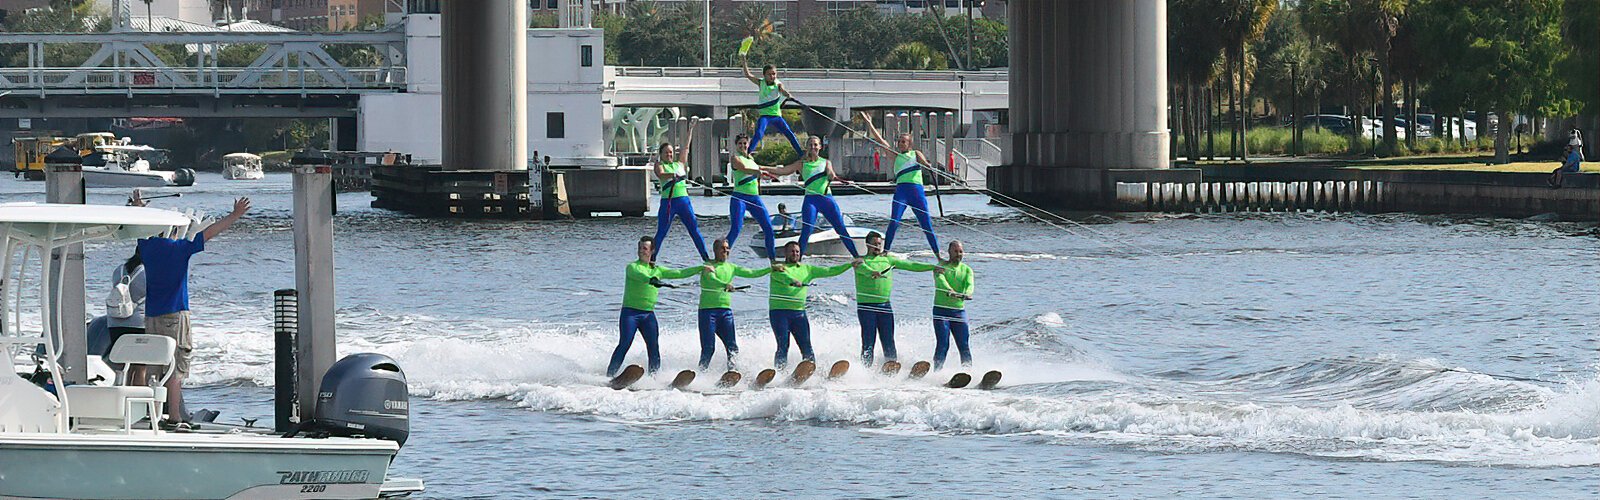 Members of the Tampa Bay Water Ski Show Team form a three-tier pyramid topped by their youngest performer, an eight-year-old girl.